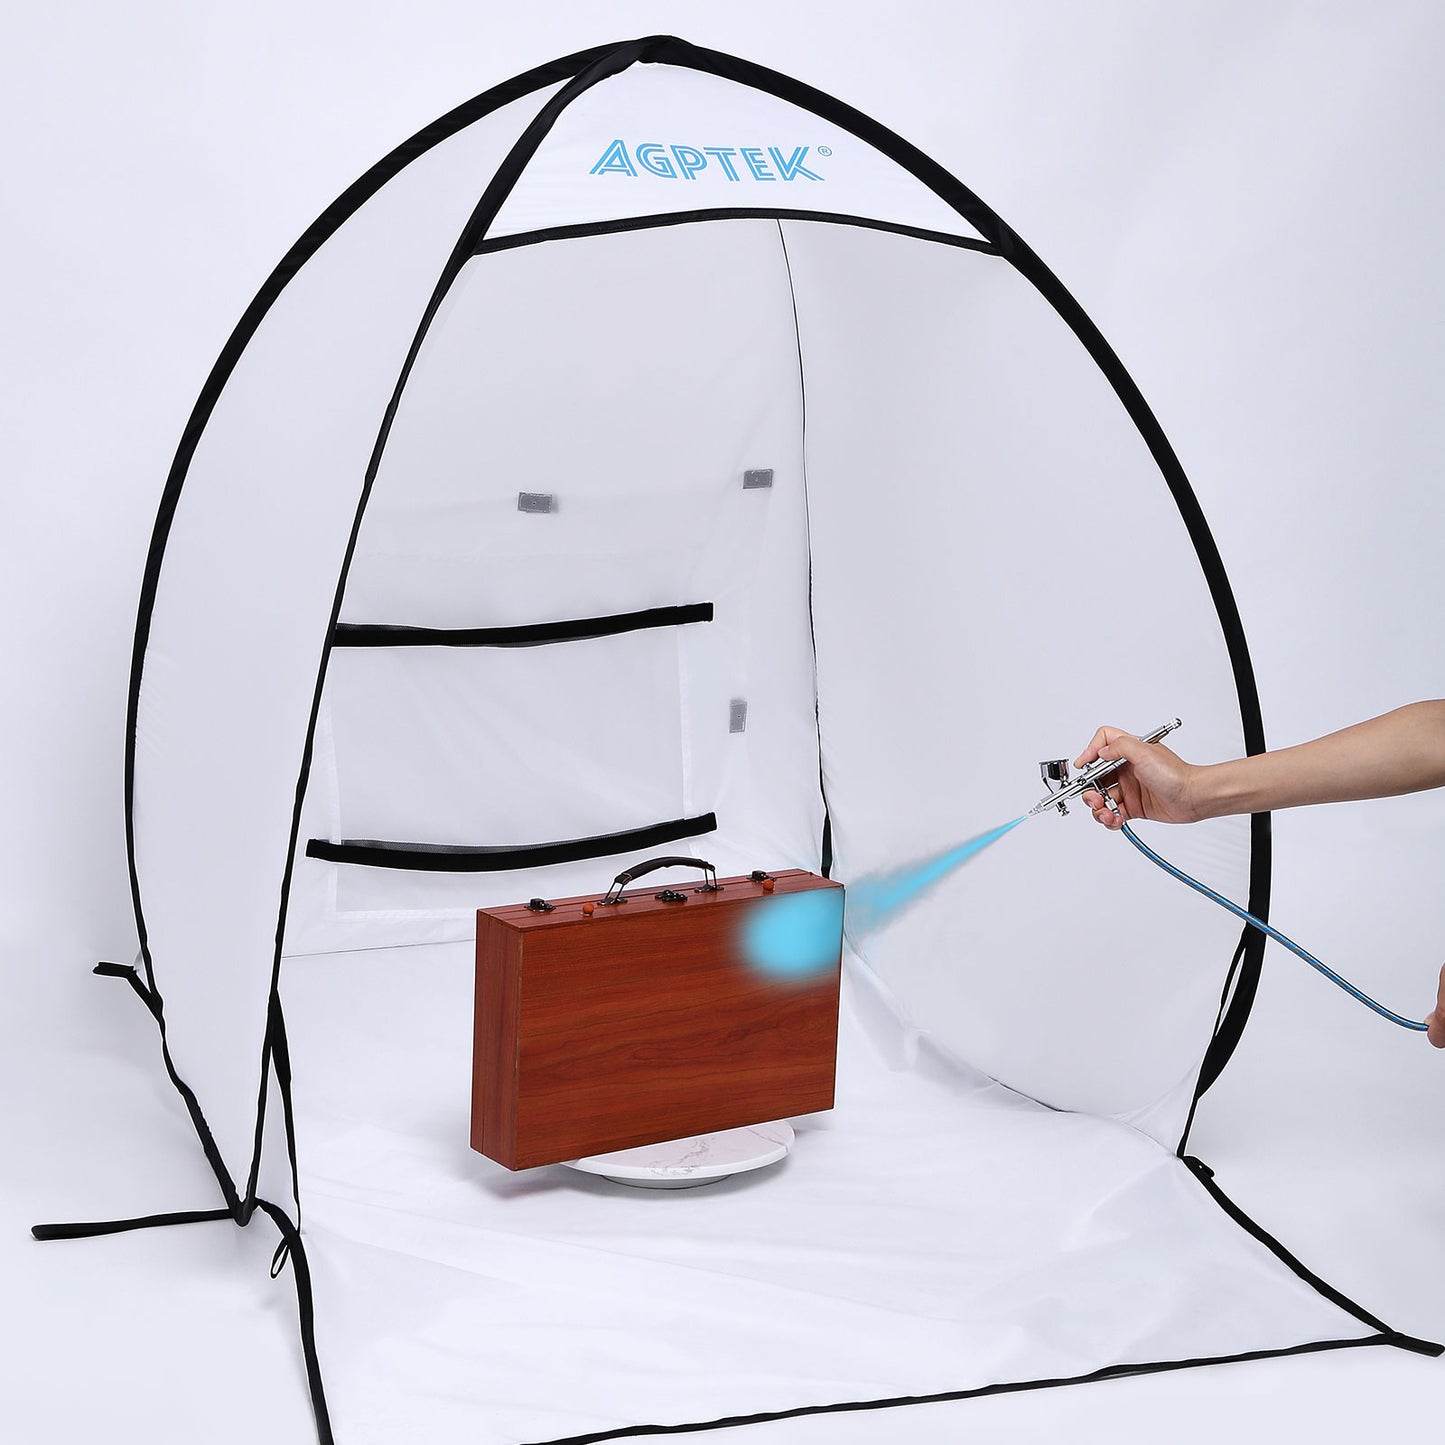 Portable Spray Paint Booth Airbrush Shelter Tent DIY Hobby